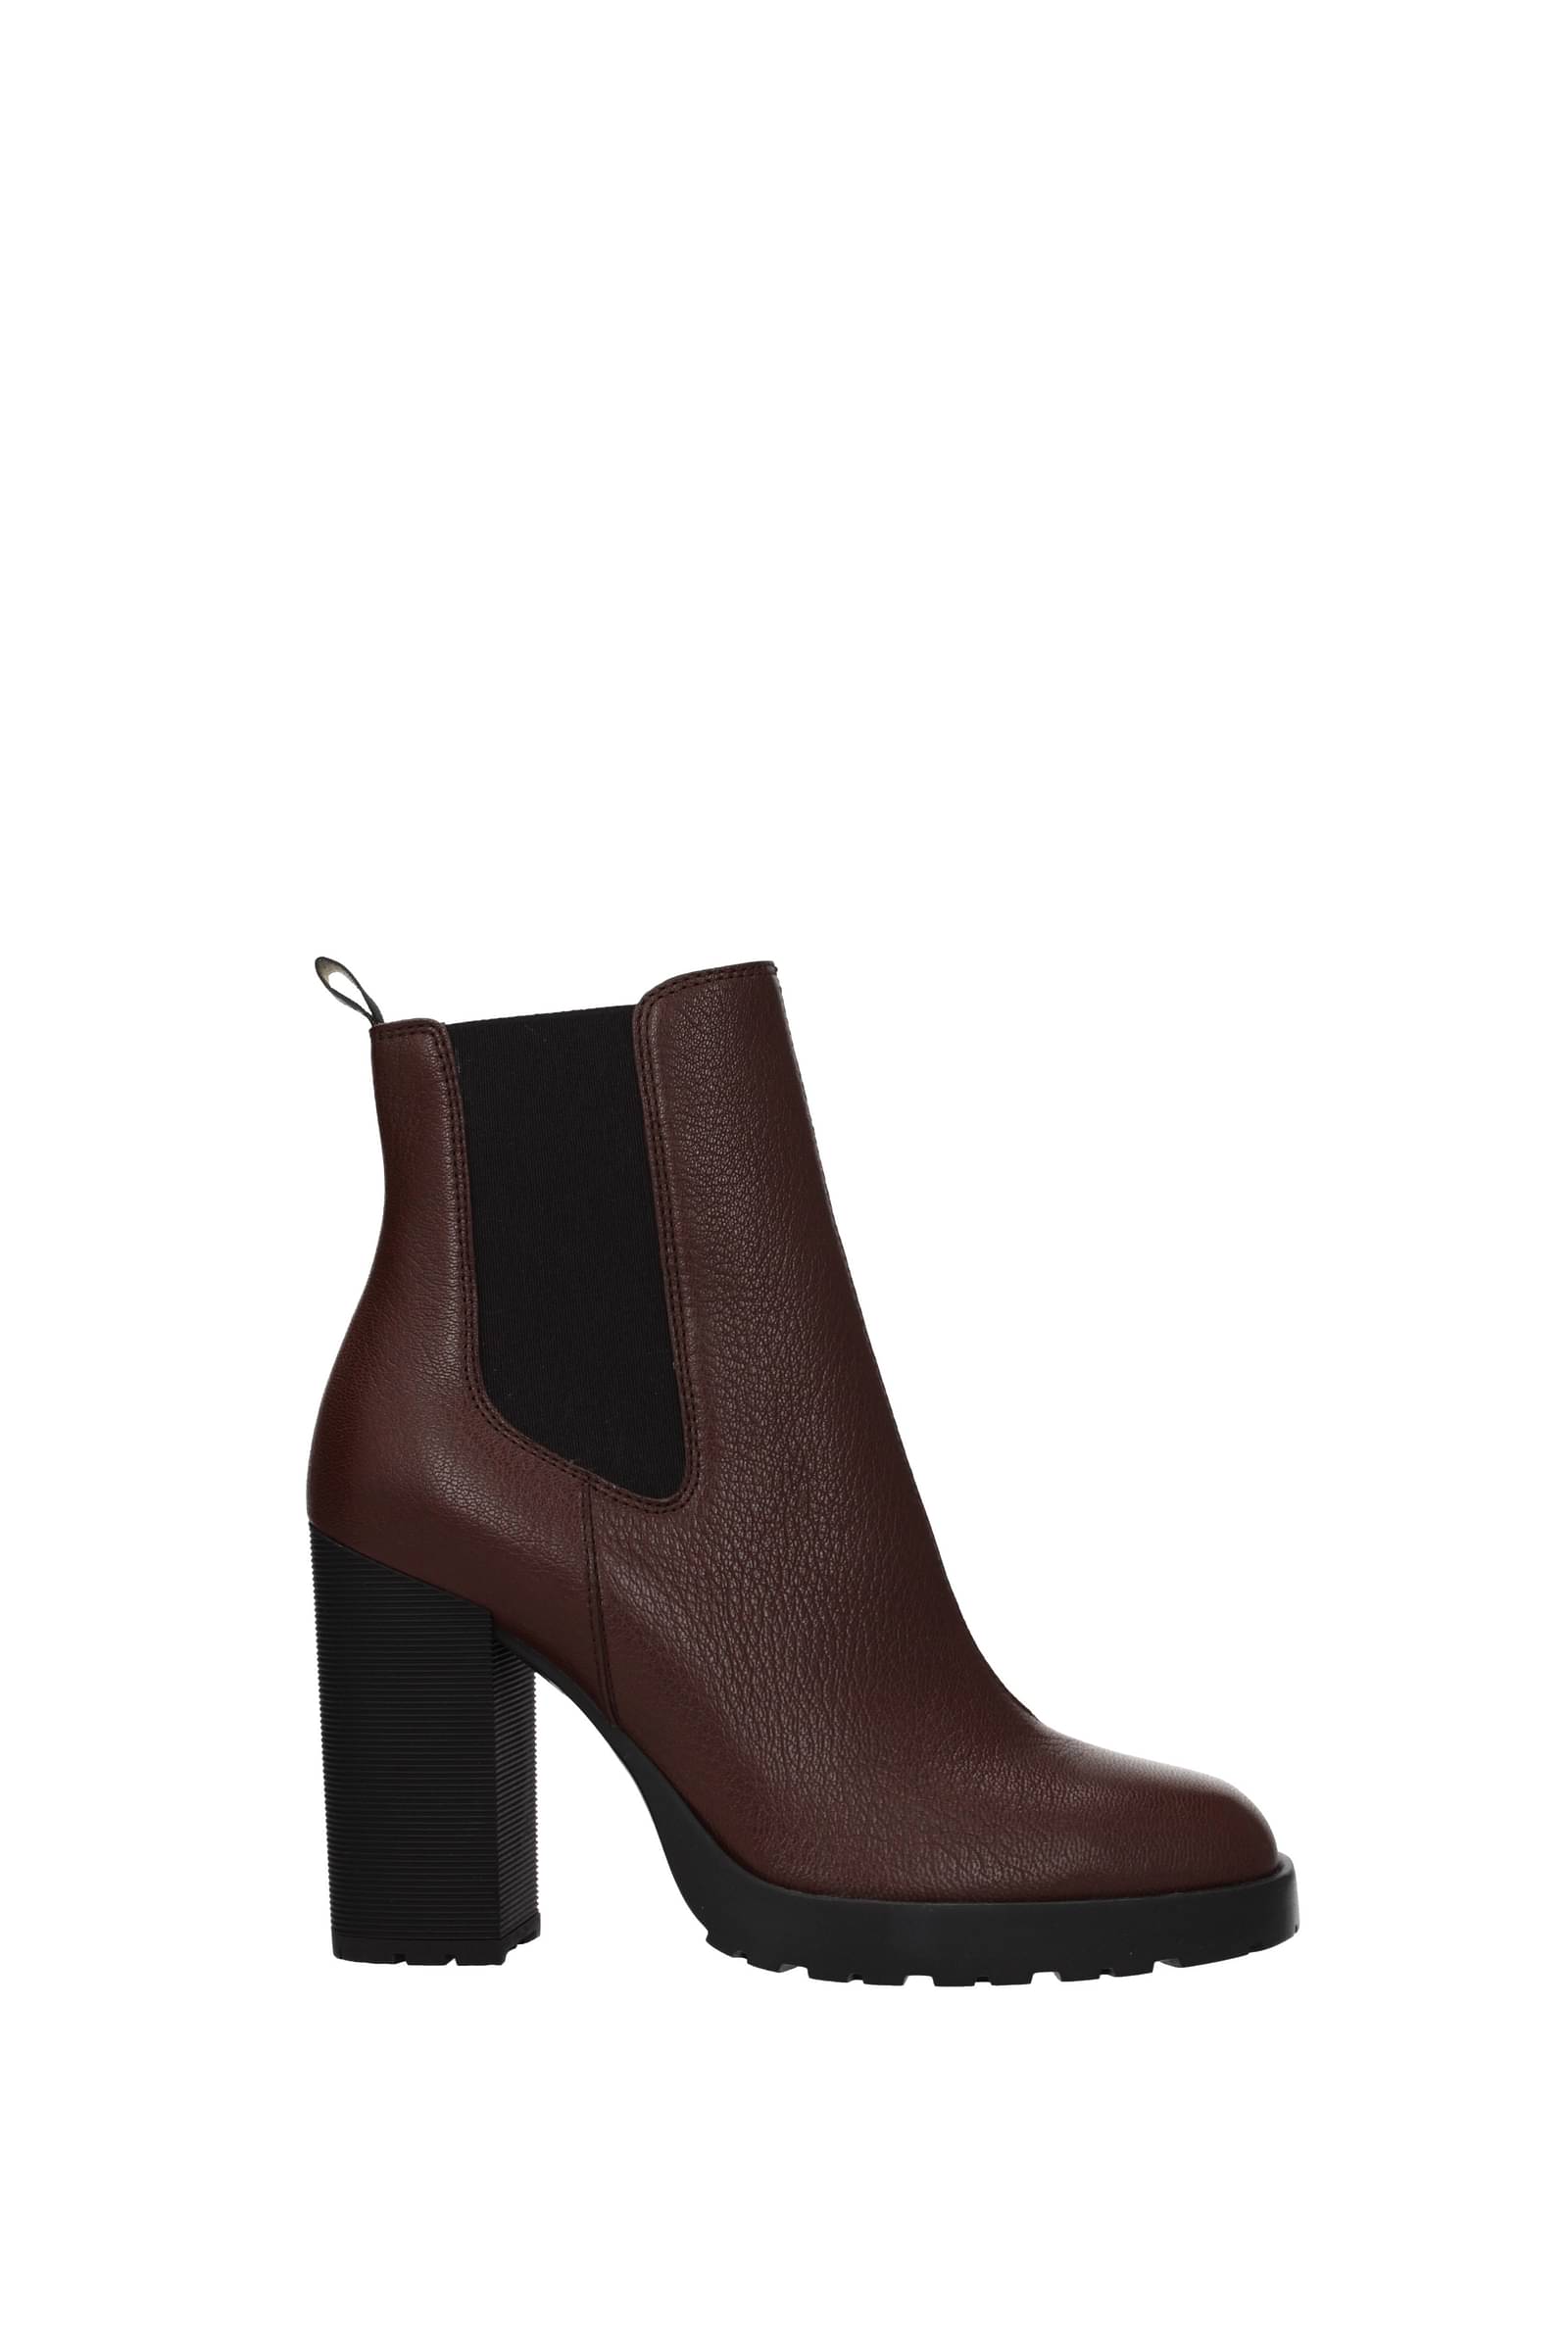 HOGAN ANKLE BOOTS MEMORY FOAM LEATHER BROWN